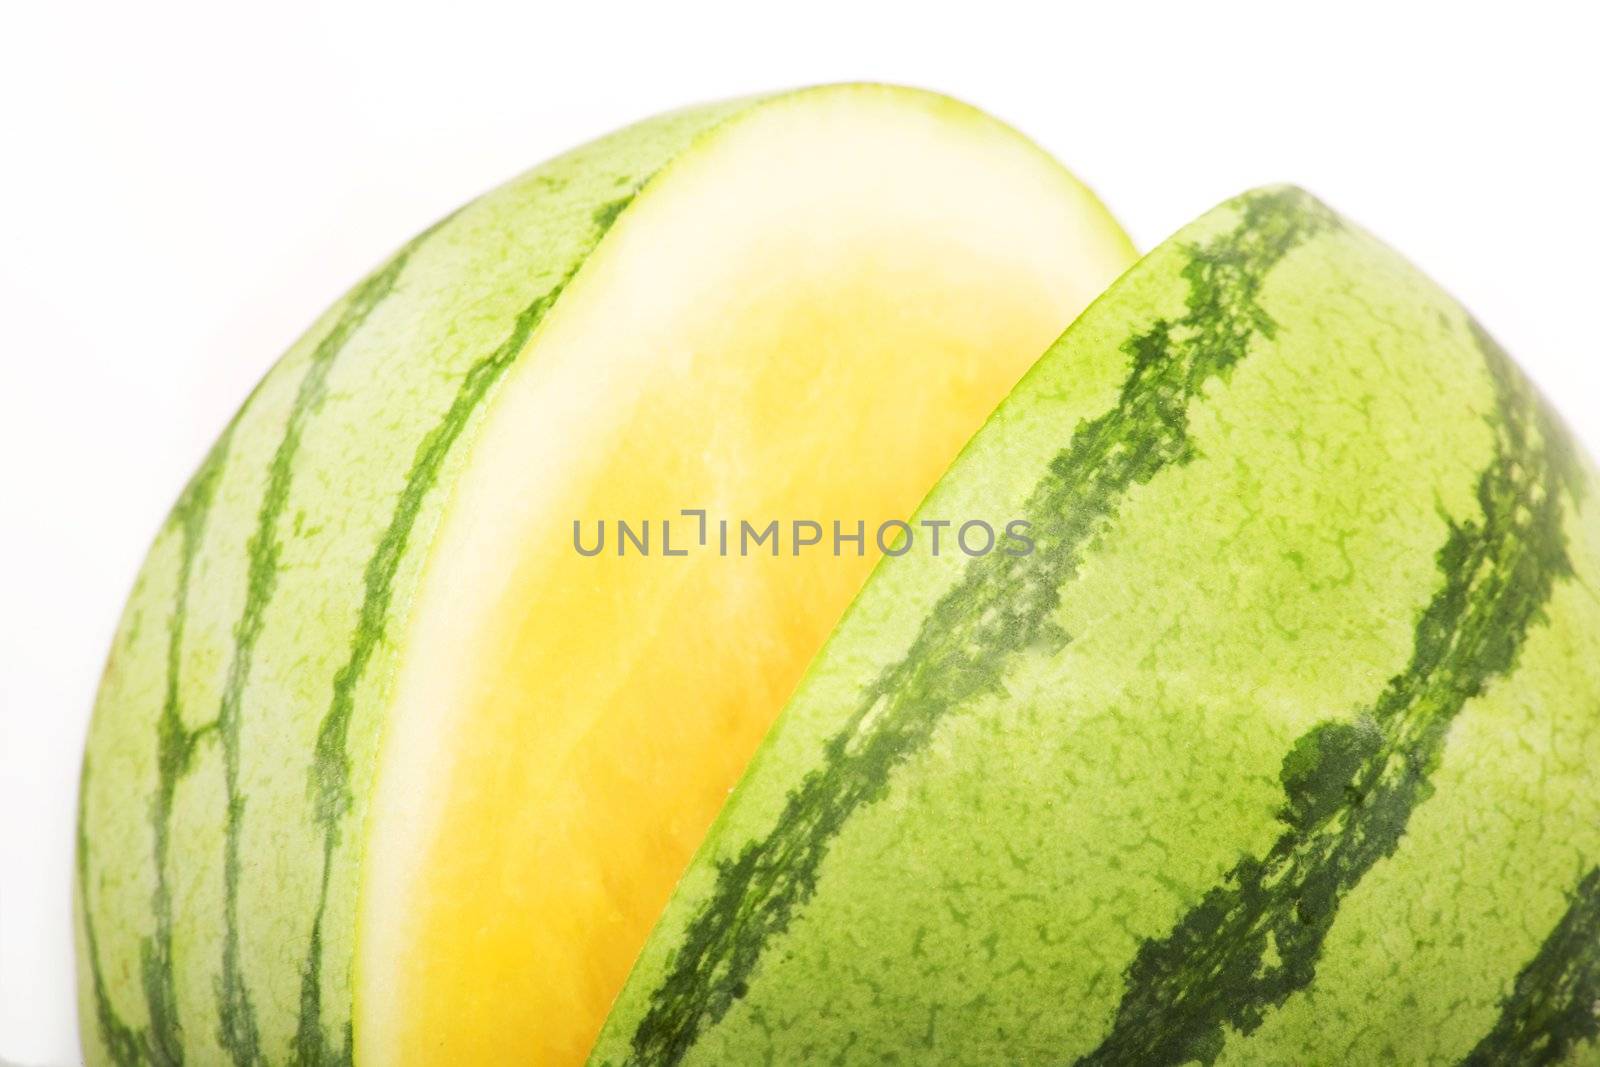 Bright yellow and green watermelon on a white background